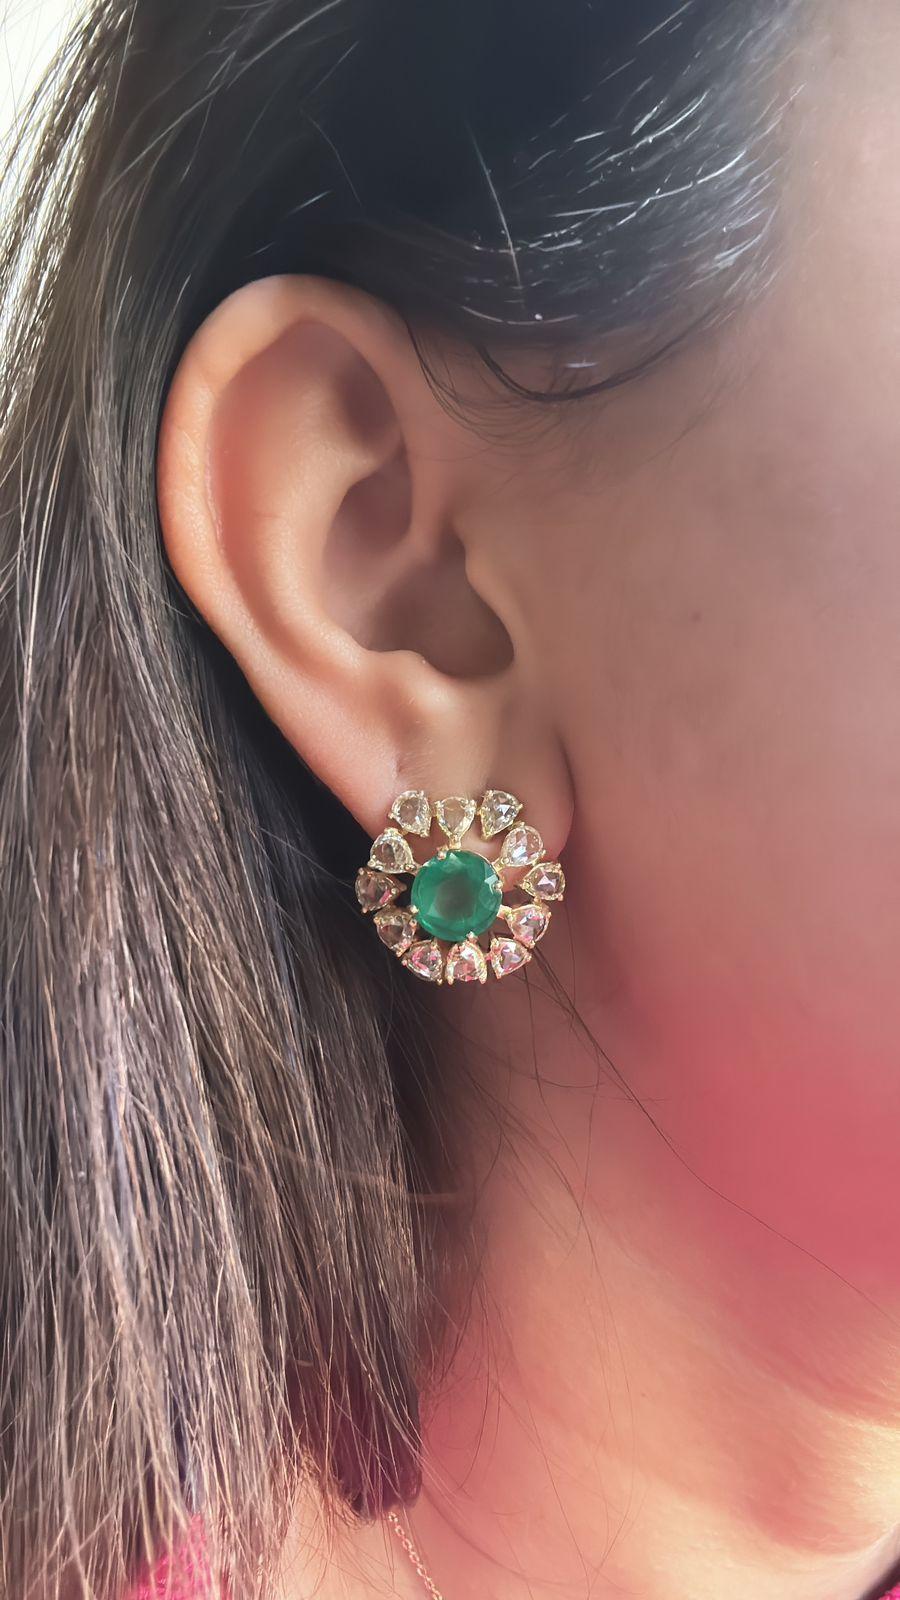 A very beautiful and special, Emerald Stud Earrings set in 18K Yellow Gold & Diamonds. The weight of the Emerald rounds is 4.86 carats. The Emeralds are completely natural, without any treatment and are of Zambian origin. The weight of the Diamonds